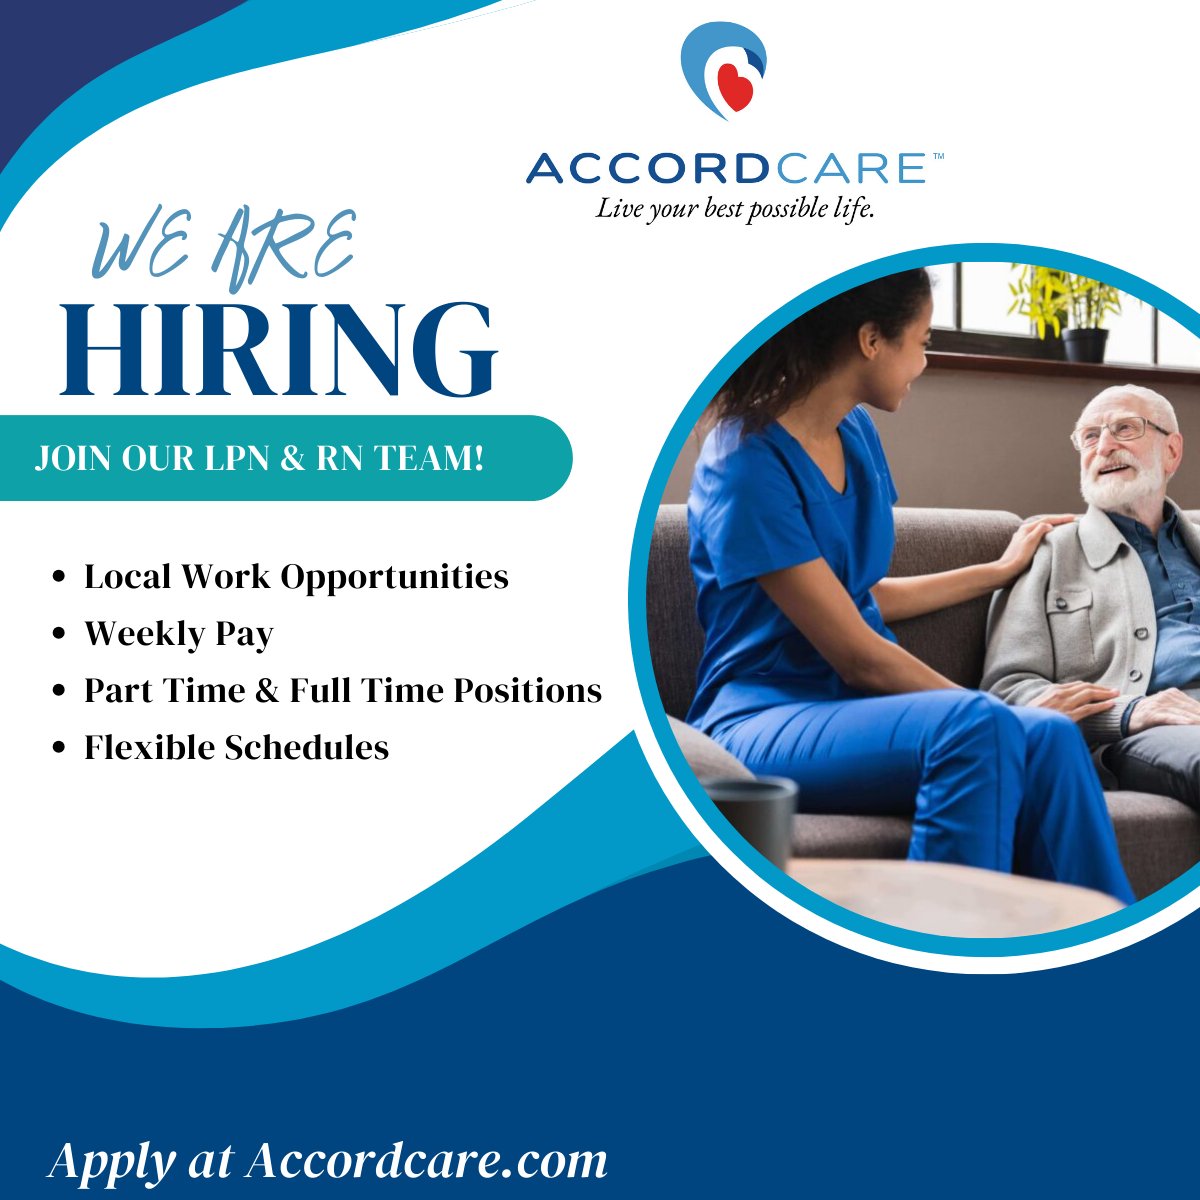 Are you a LPN or RN? WE ARE LOOKING FOR YOU! Apply now at accordcare.com and be part of our mission to bring compassionate care to Georgia! #CaregiverJobs #AtlantaJobs #JoinOurTeam #HiringCaregivers #HomeCare #ATLCaregivers #GeorgiaNurseJobs